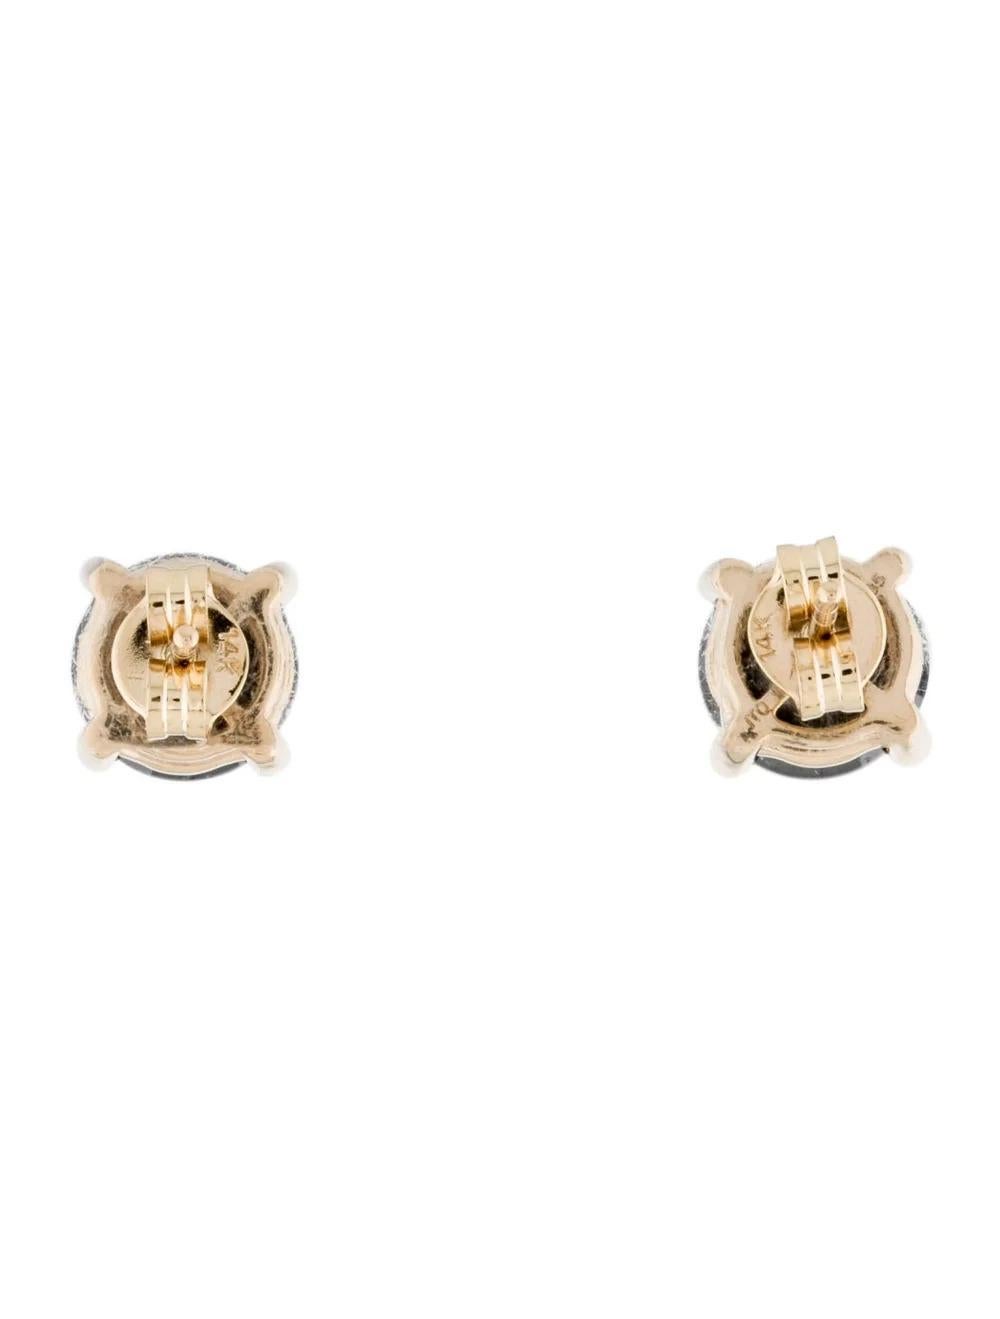 14K Gold 4.74ctw Diamond Stud Earrings - Round Brilliant Cut - Timeless Elegance In New Condition For Sale In Holtsville, NY